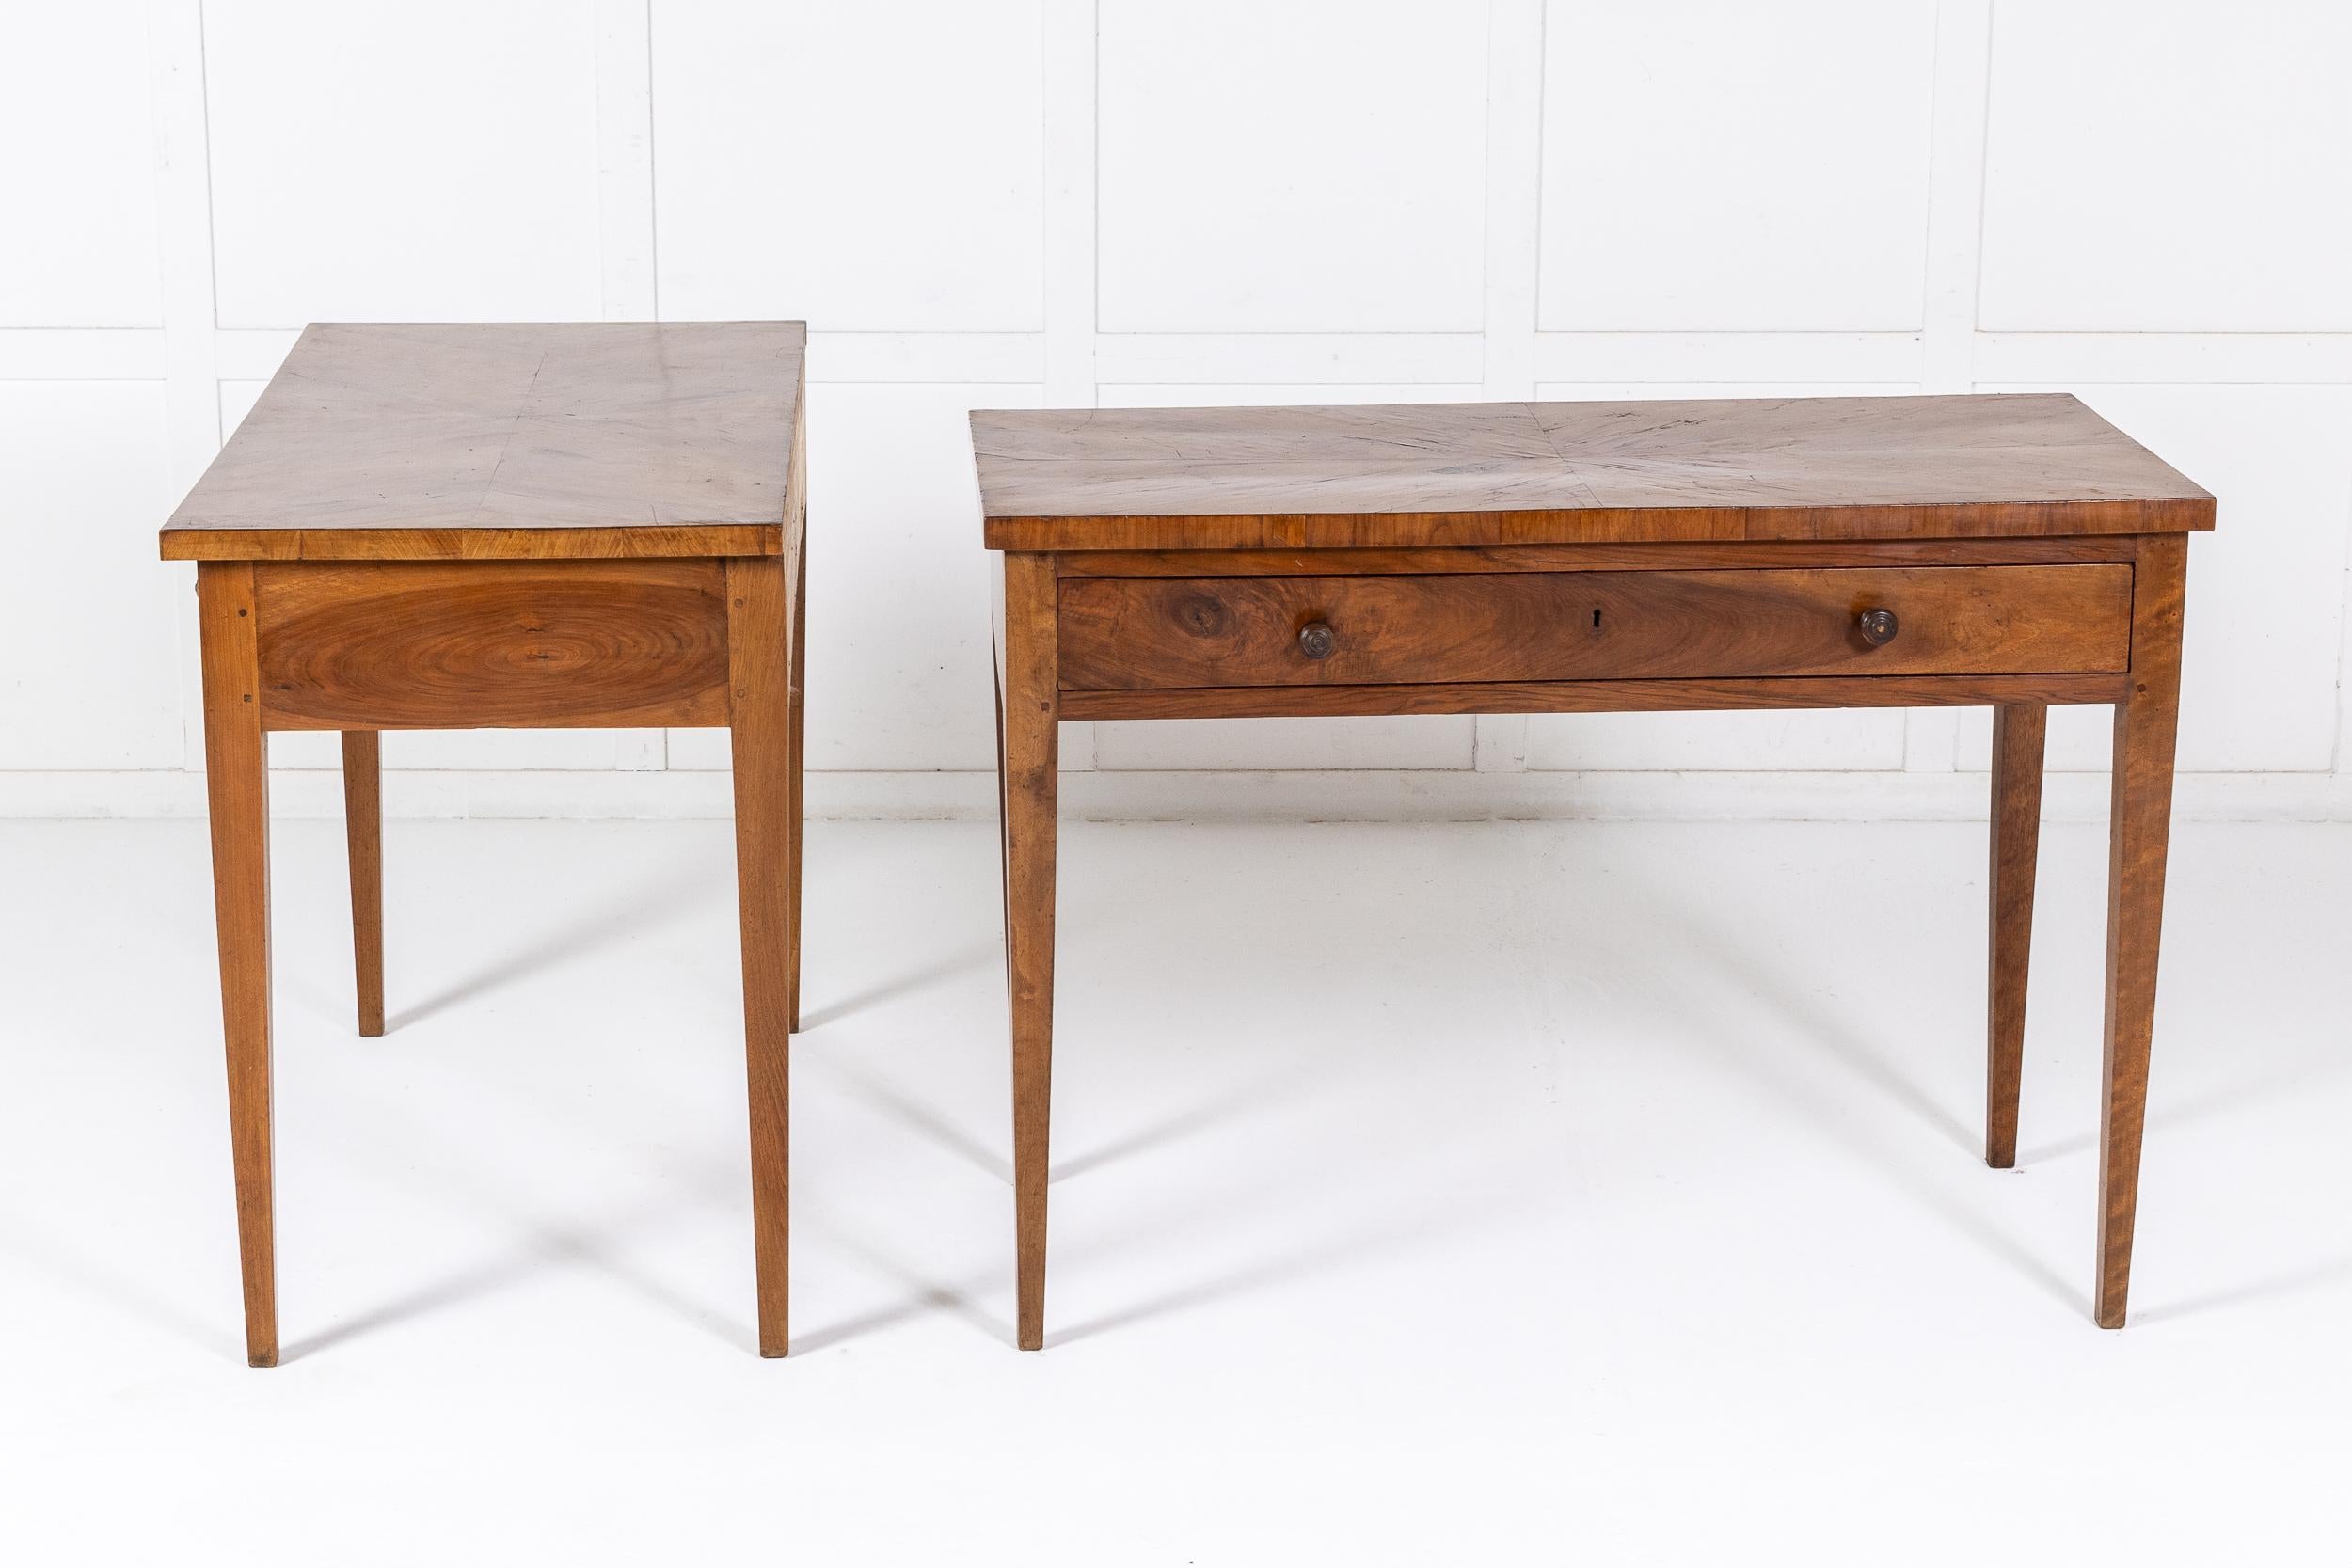 A Fine and Large Pair of 18th Century French Louis XVI Period Side or Console Tables in Ash and Walnut.

The tables are finely proportioned and are larger than average size for pieces of this type. They are timelessly elegant in their design with